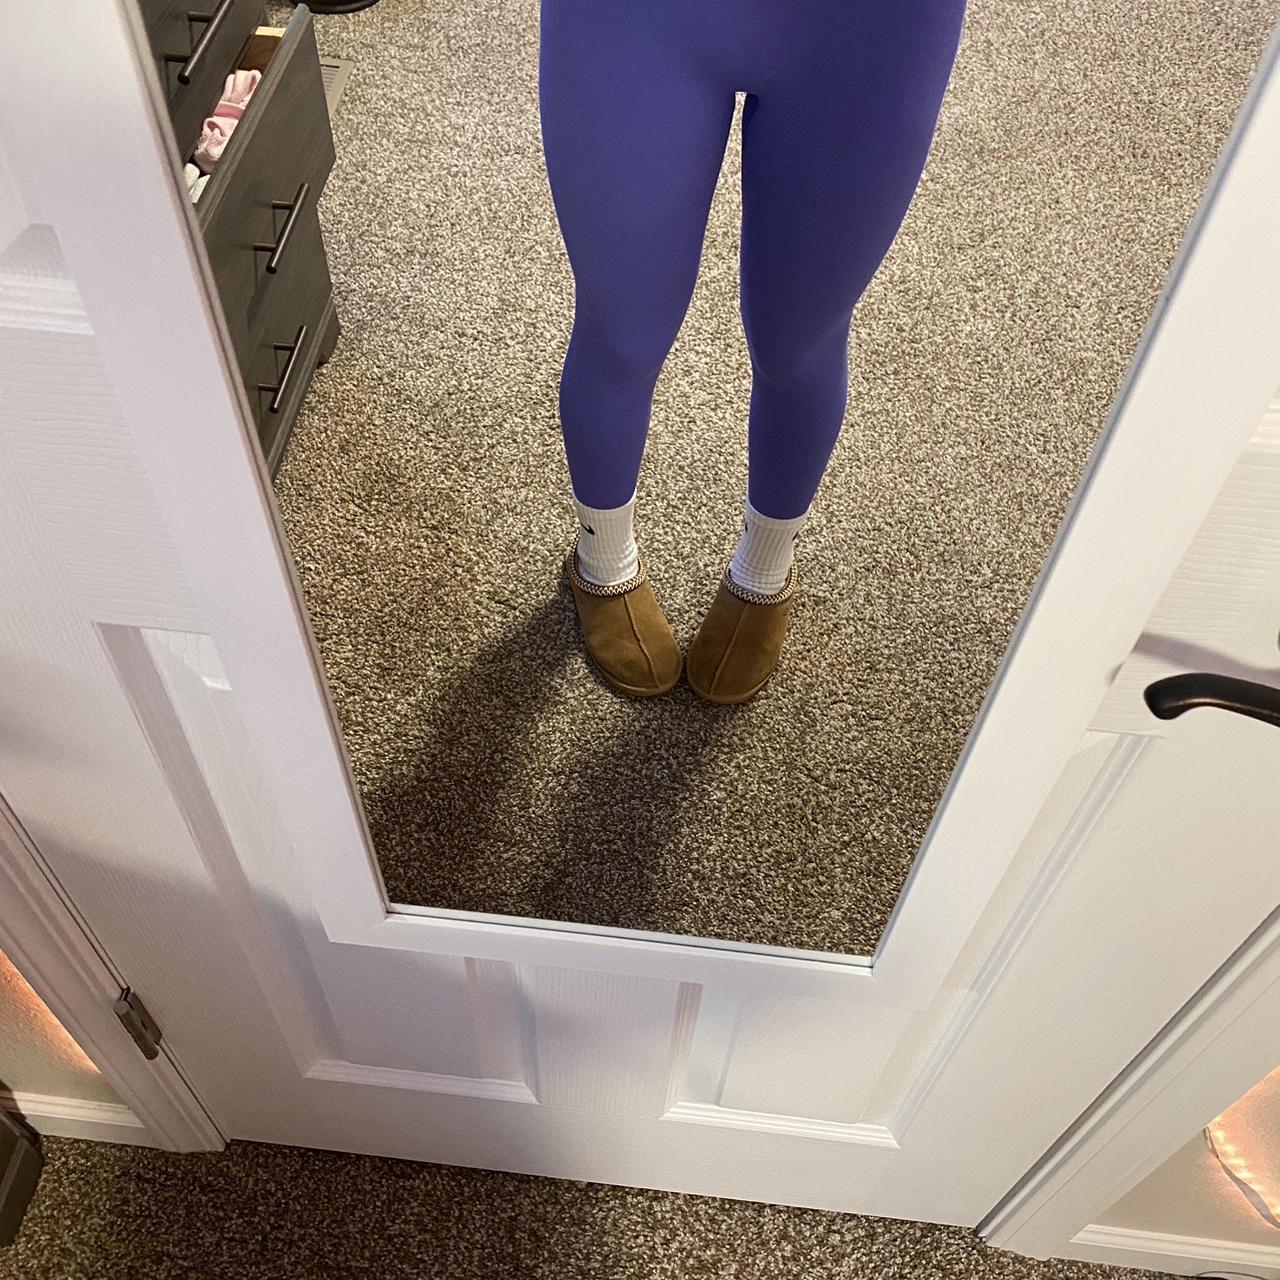 target brand/ all in motion purple seamless ribbed - Depop